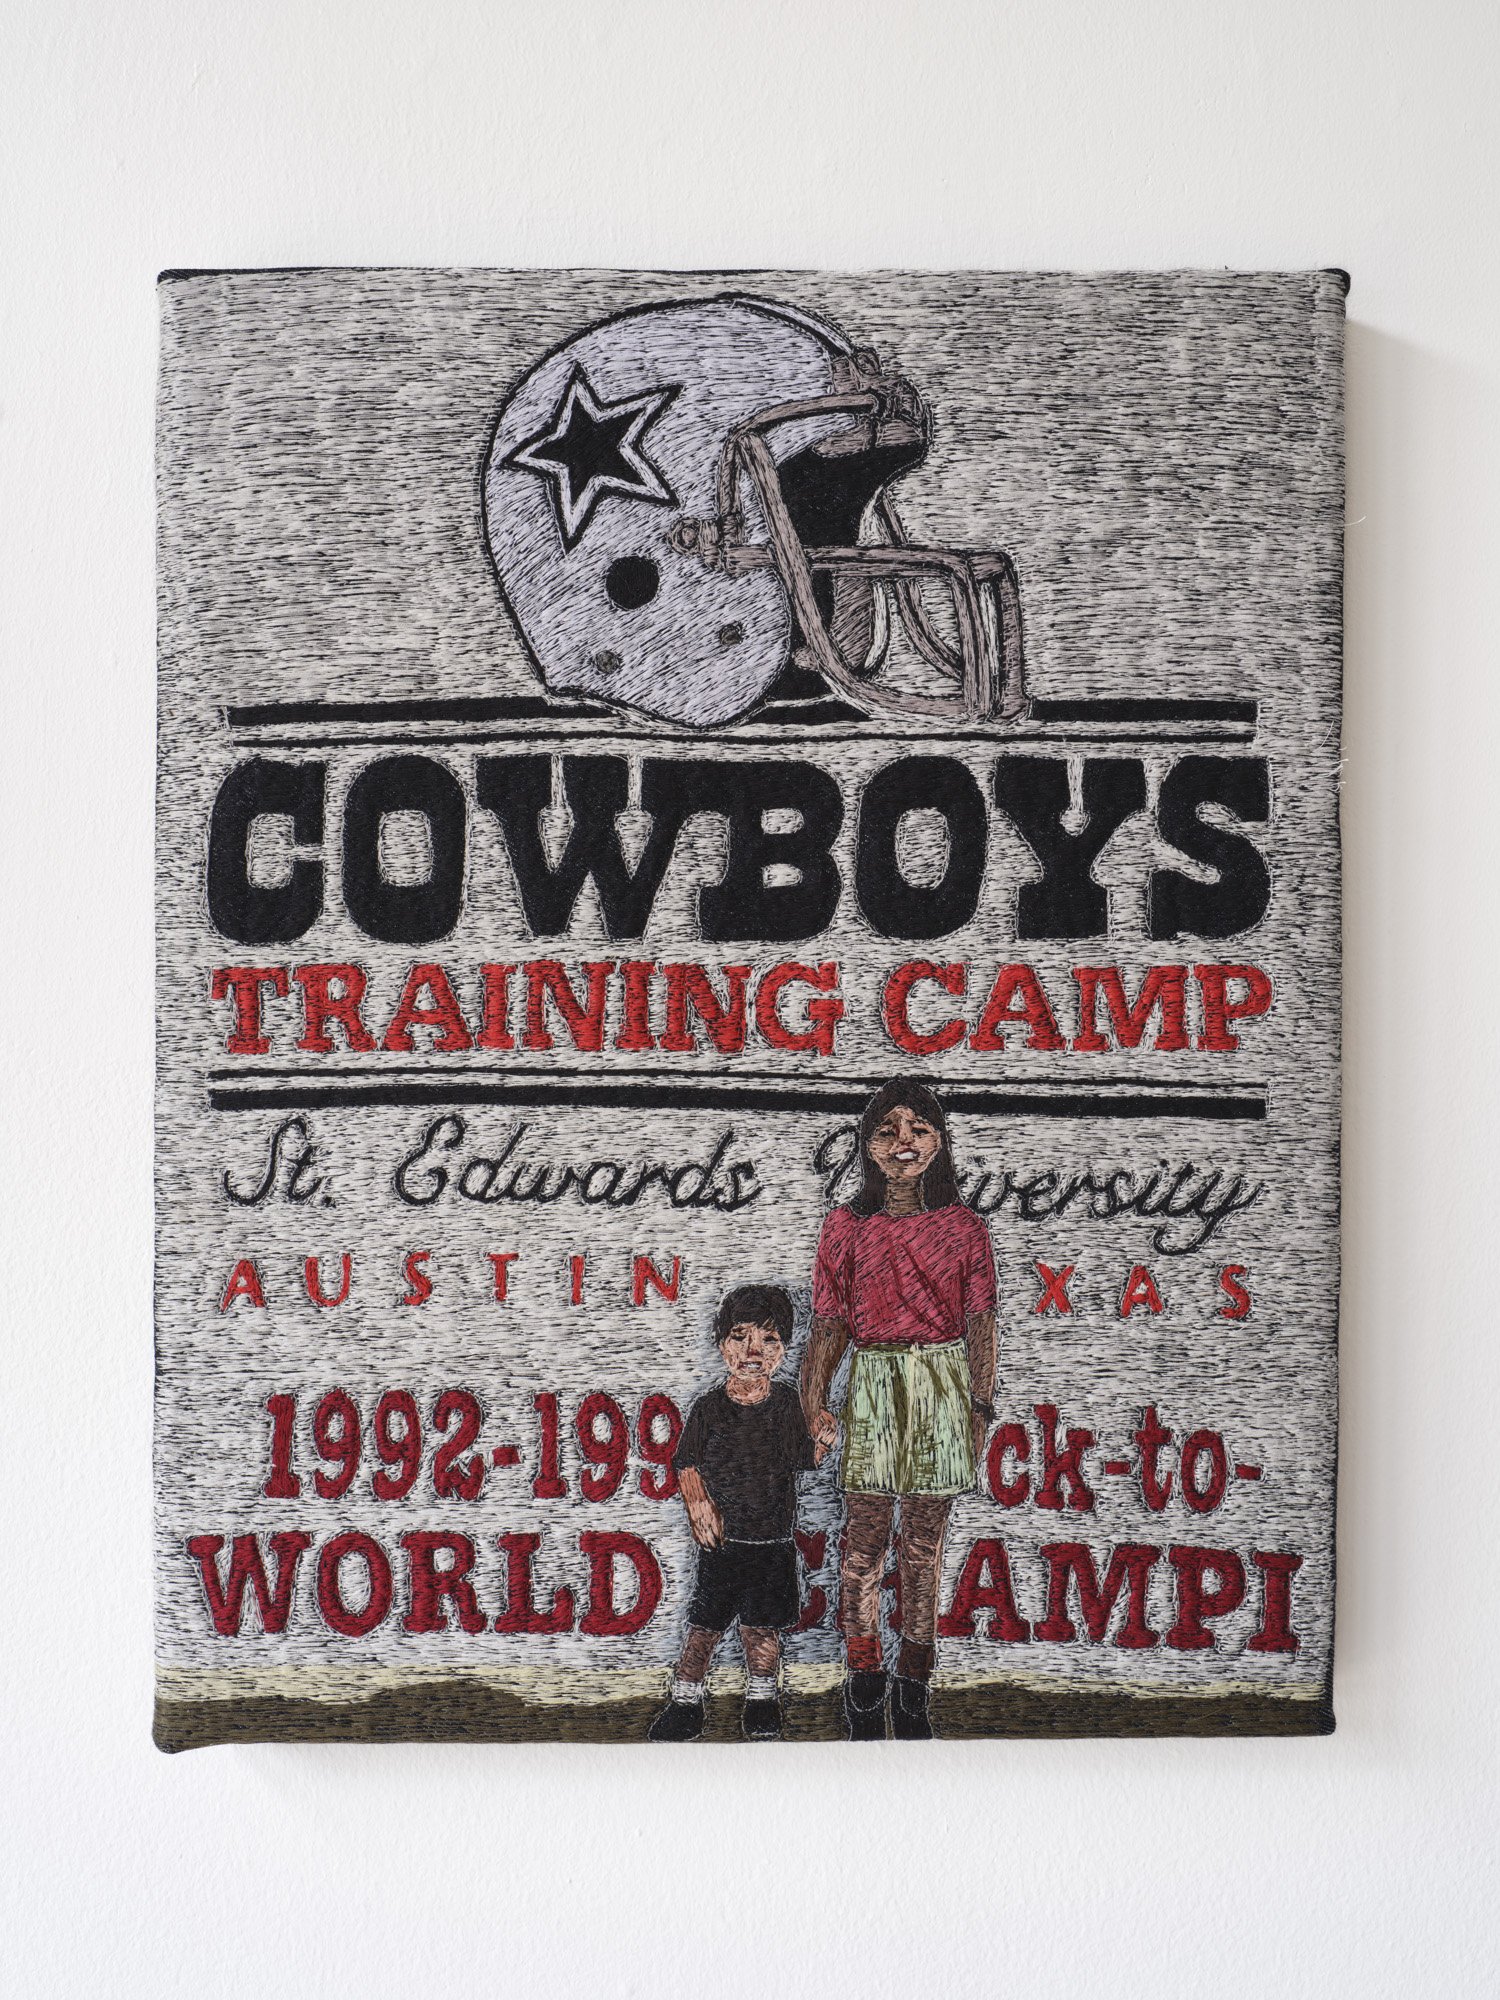   Cowboys Training Camp (Ricky and Nina)   16 x 20 inches  Polyester thread on denim   2023 